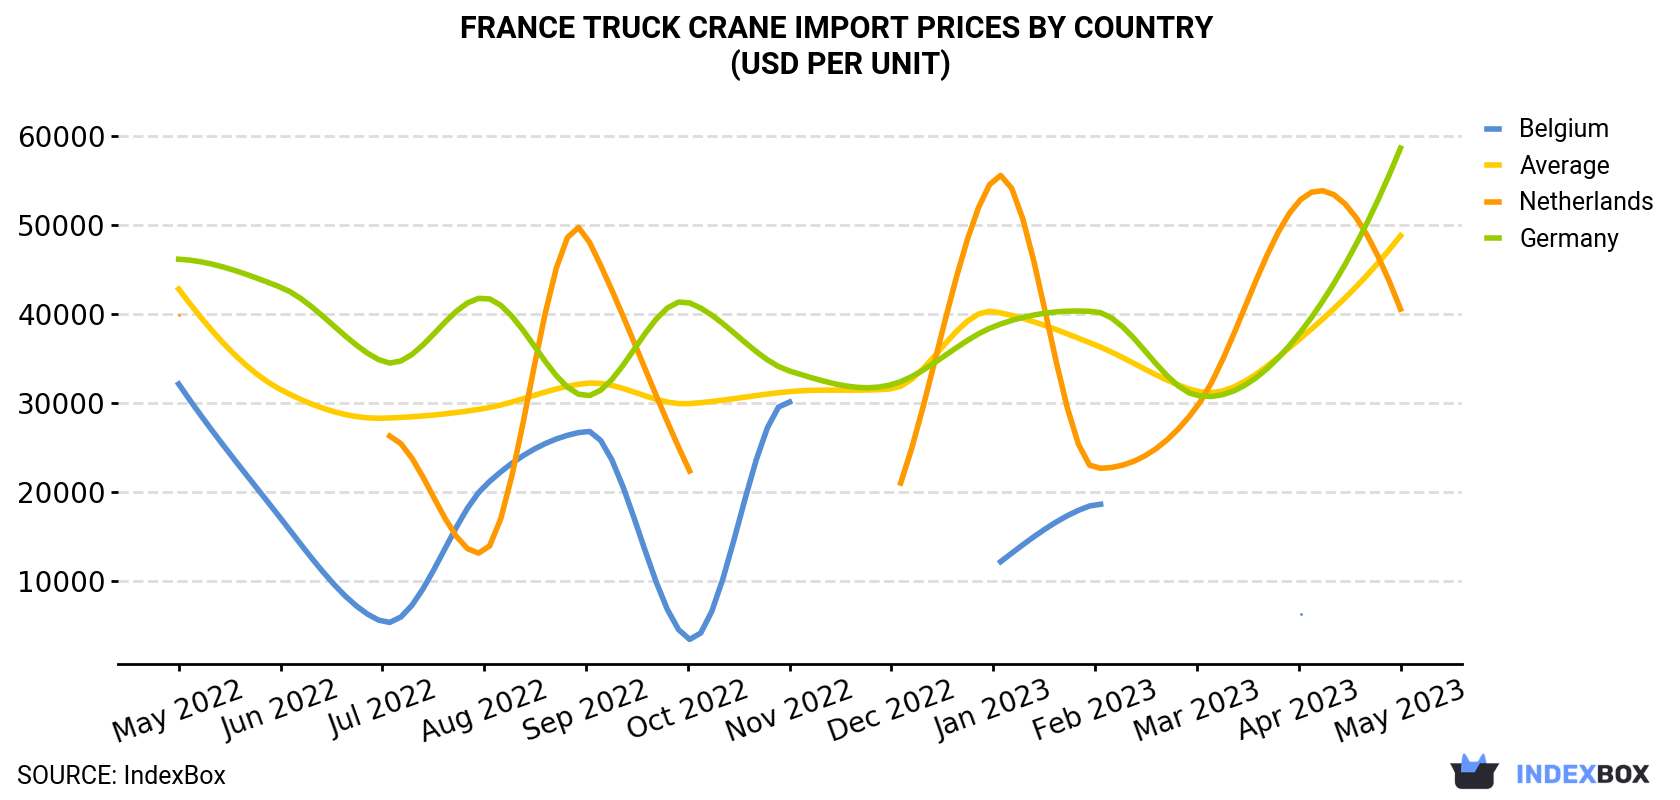 France Truck Crane Import Prices By Country (USD Per Unit)